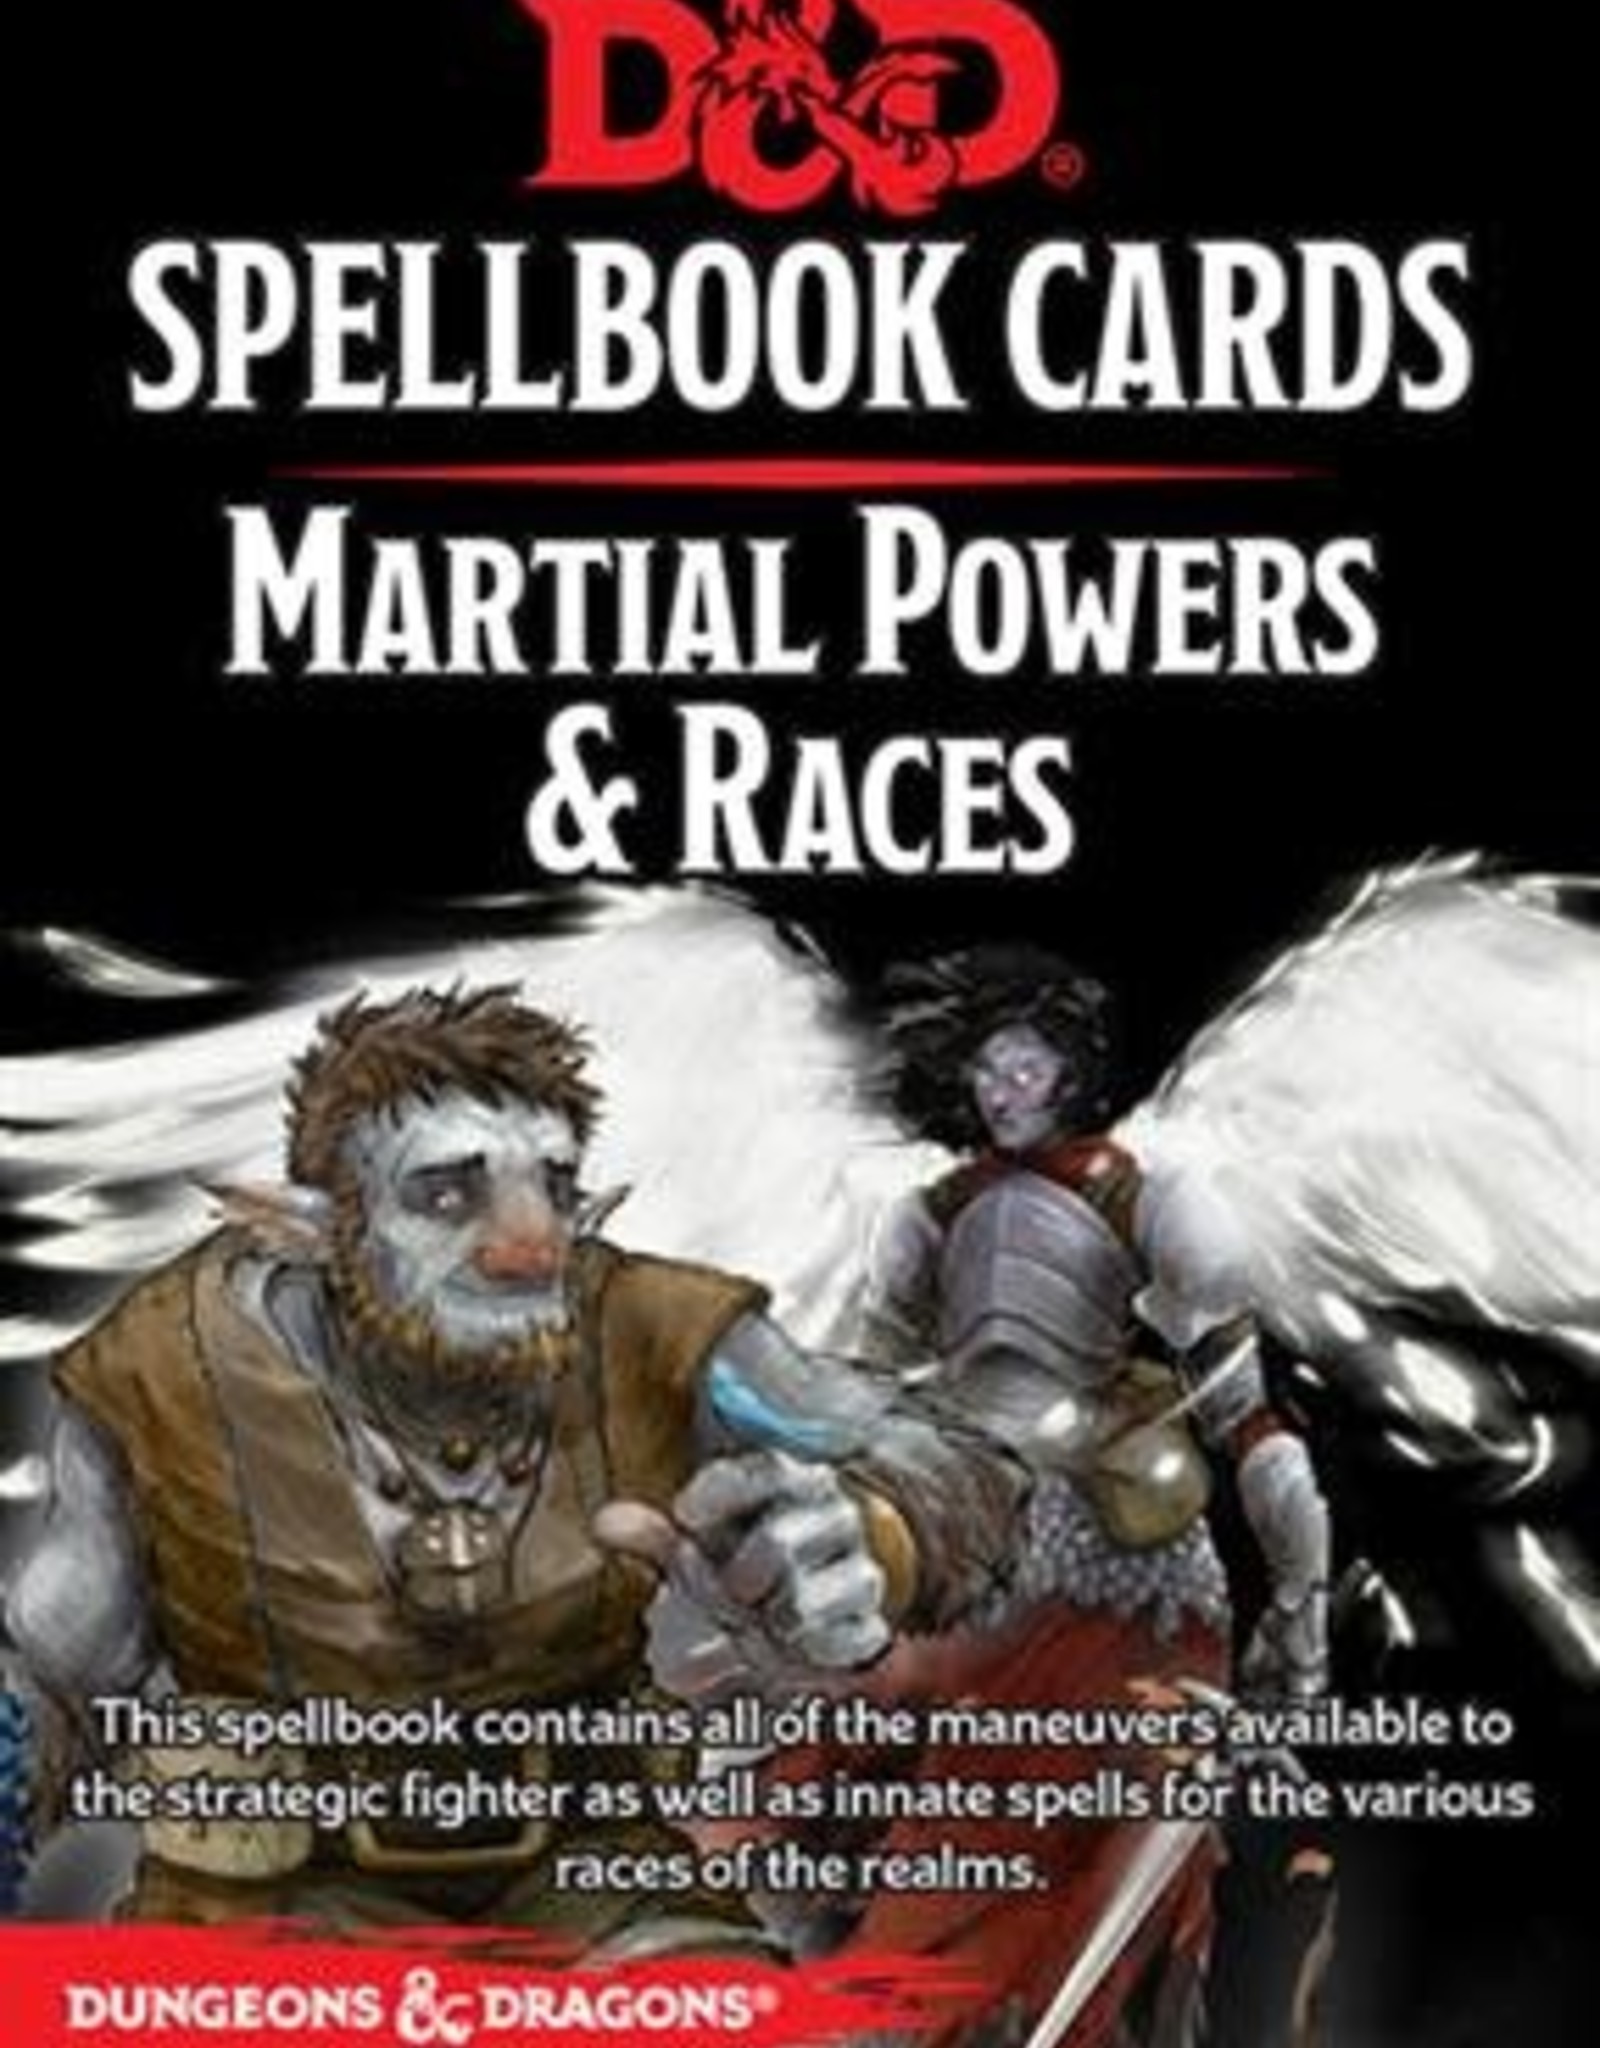 Wizards of the Coast Dungeons & Dragons Spellbook Cards Martial Powers & Races